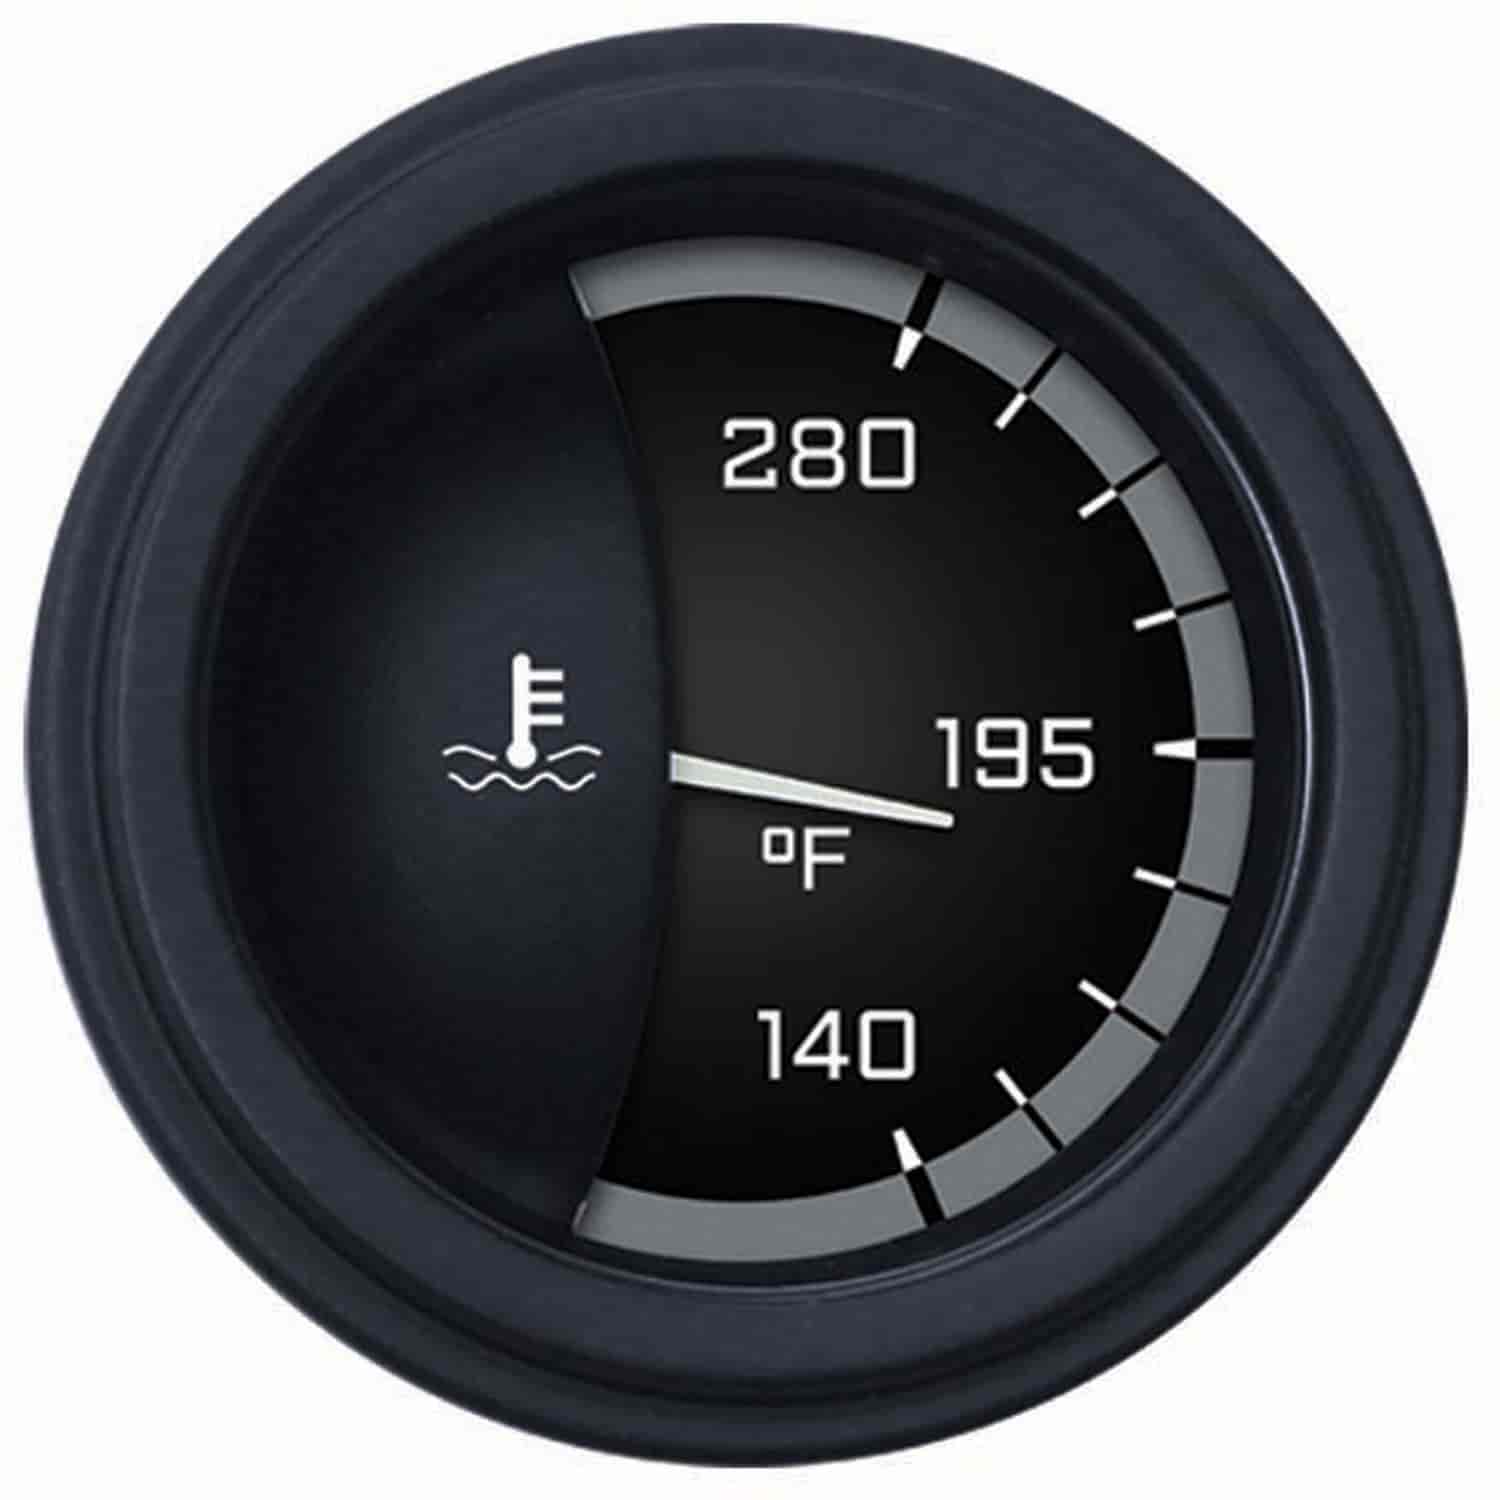 Gray AutoCross Series Water Temperature Gauge 2-1/8" Electrical